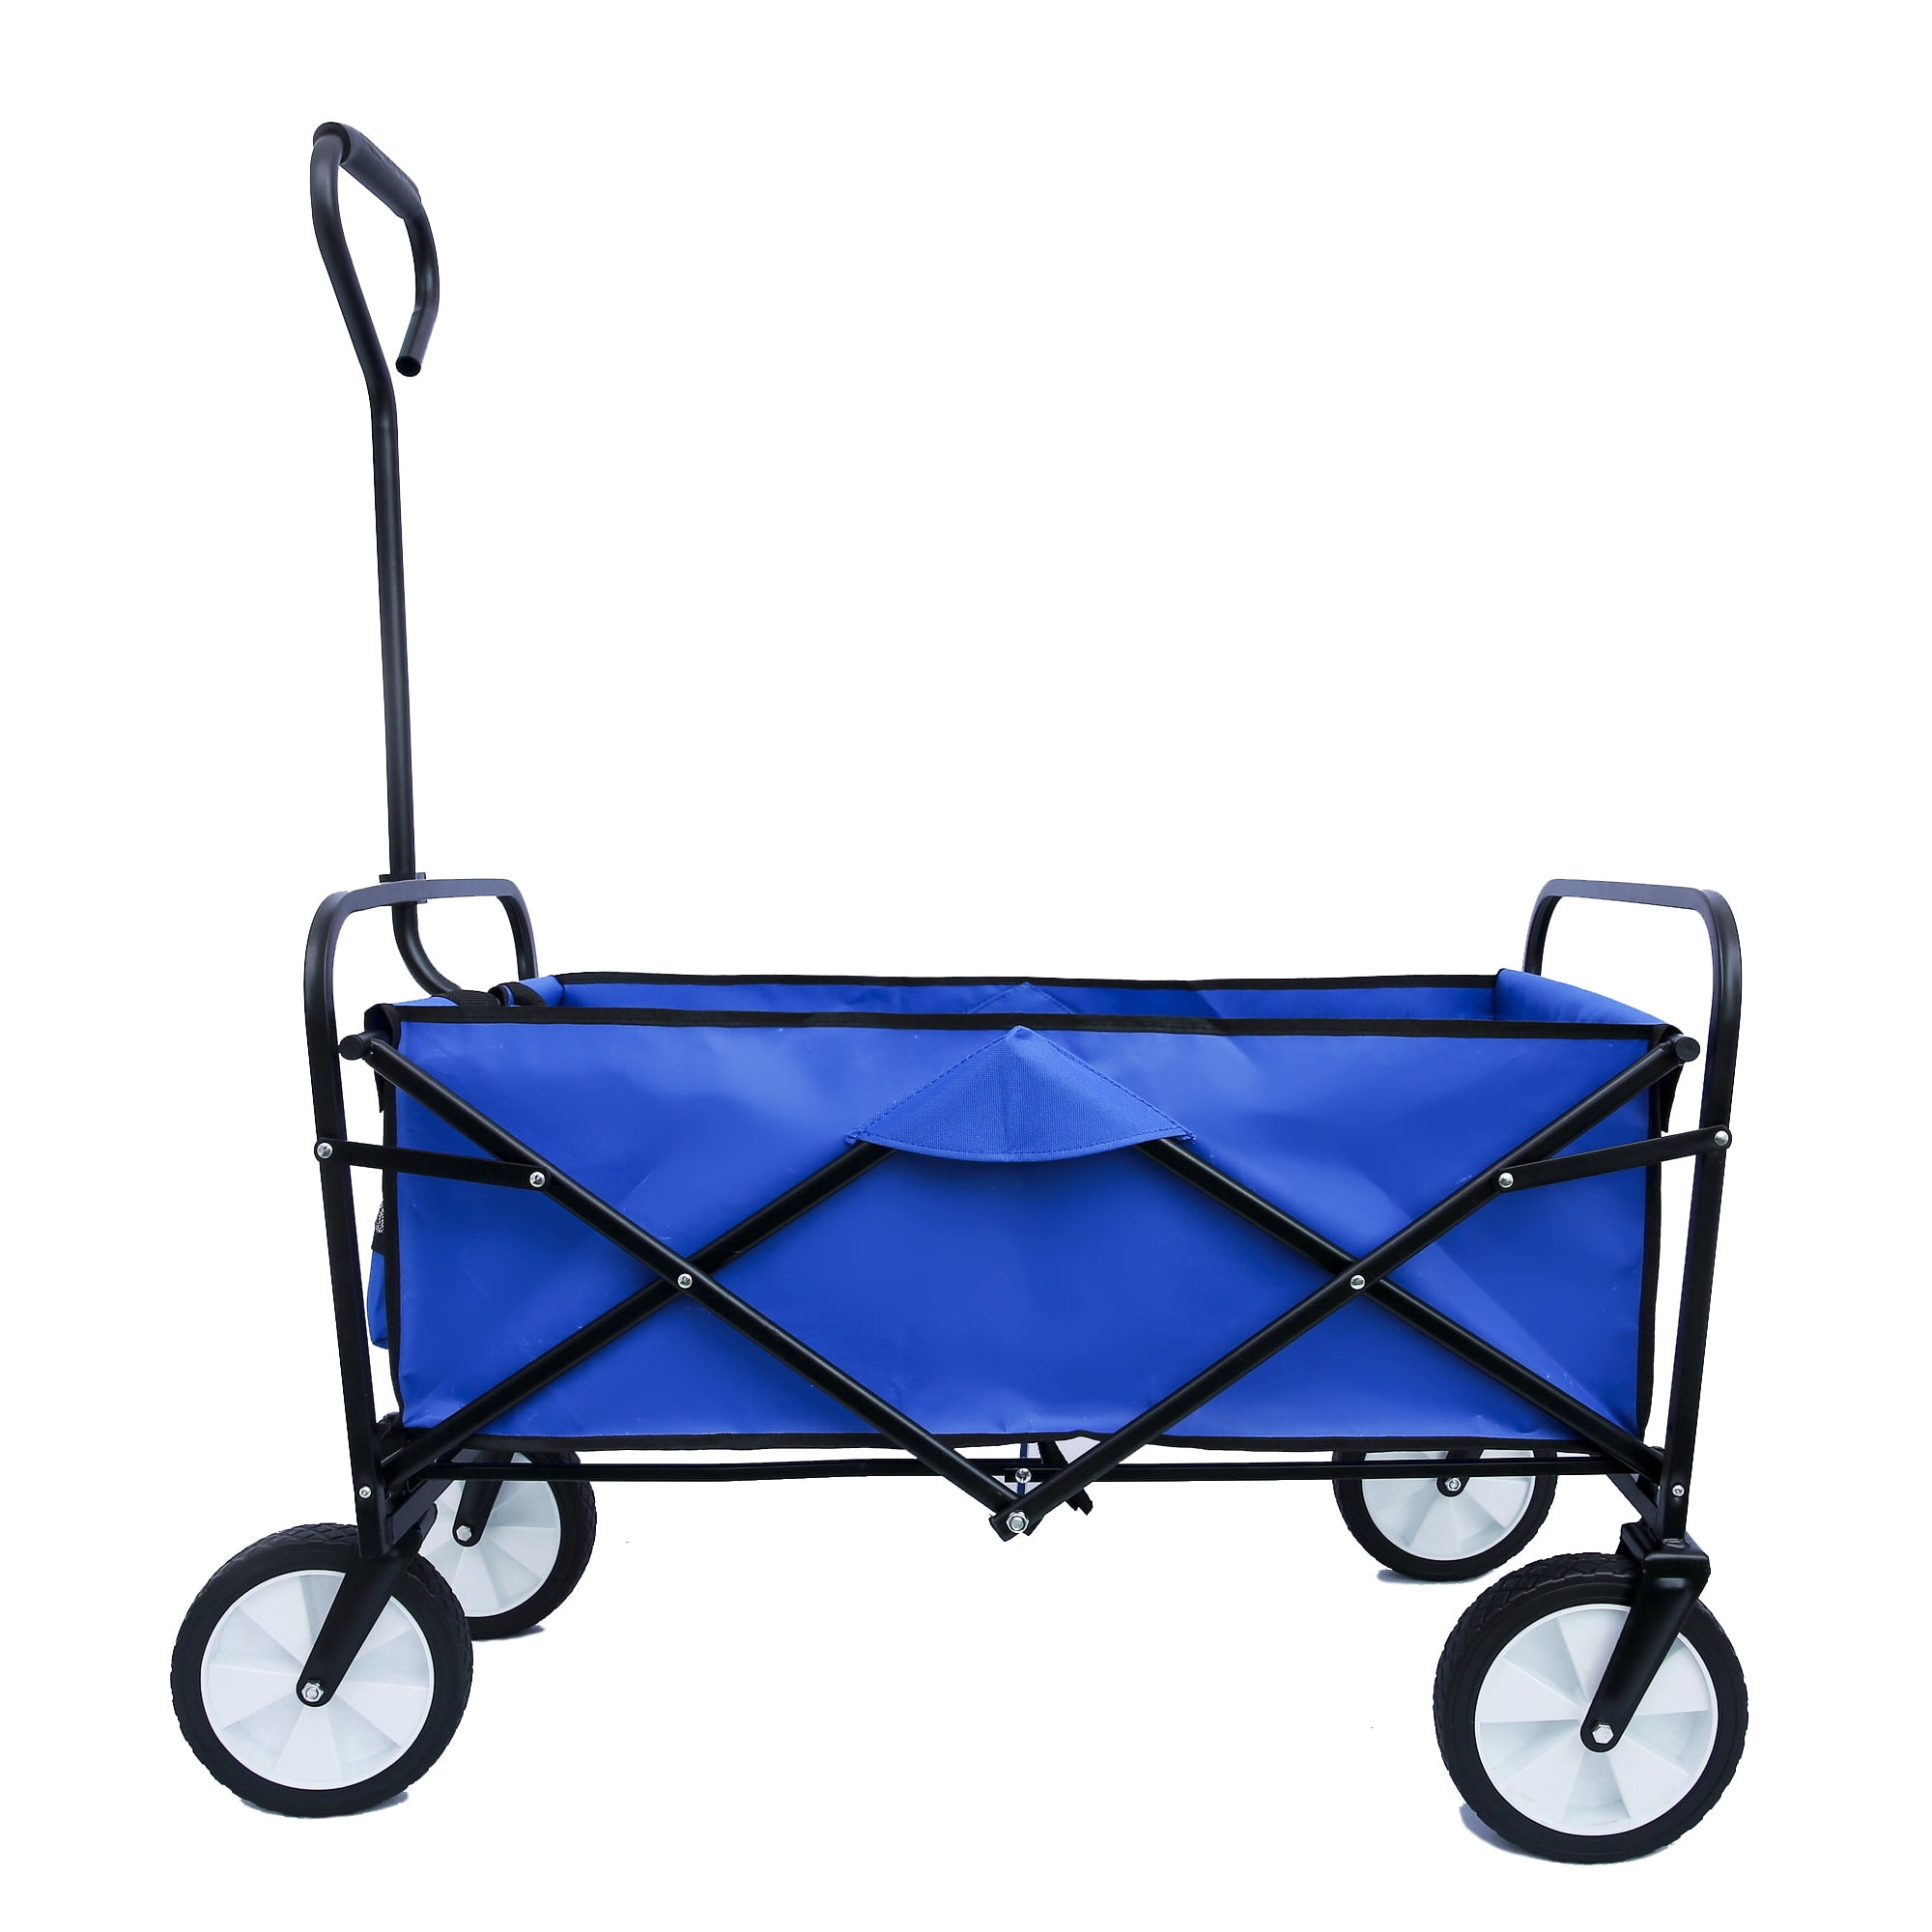 Beach Trip and Camping Collapsible Outdoor Wagon Stroller with Wheels,Garden Portable Hand Cart with Wheels,Wagon Stroller for Shopping and Park Picnic Blue